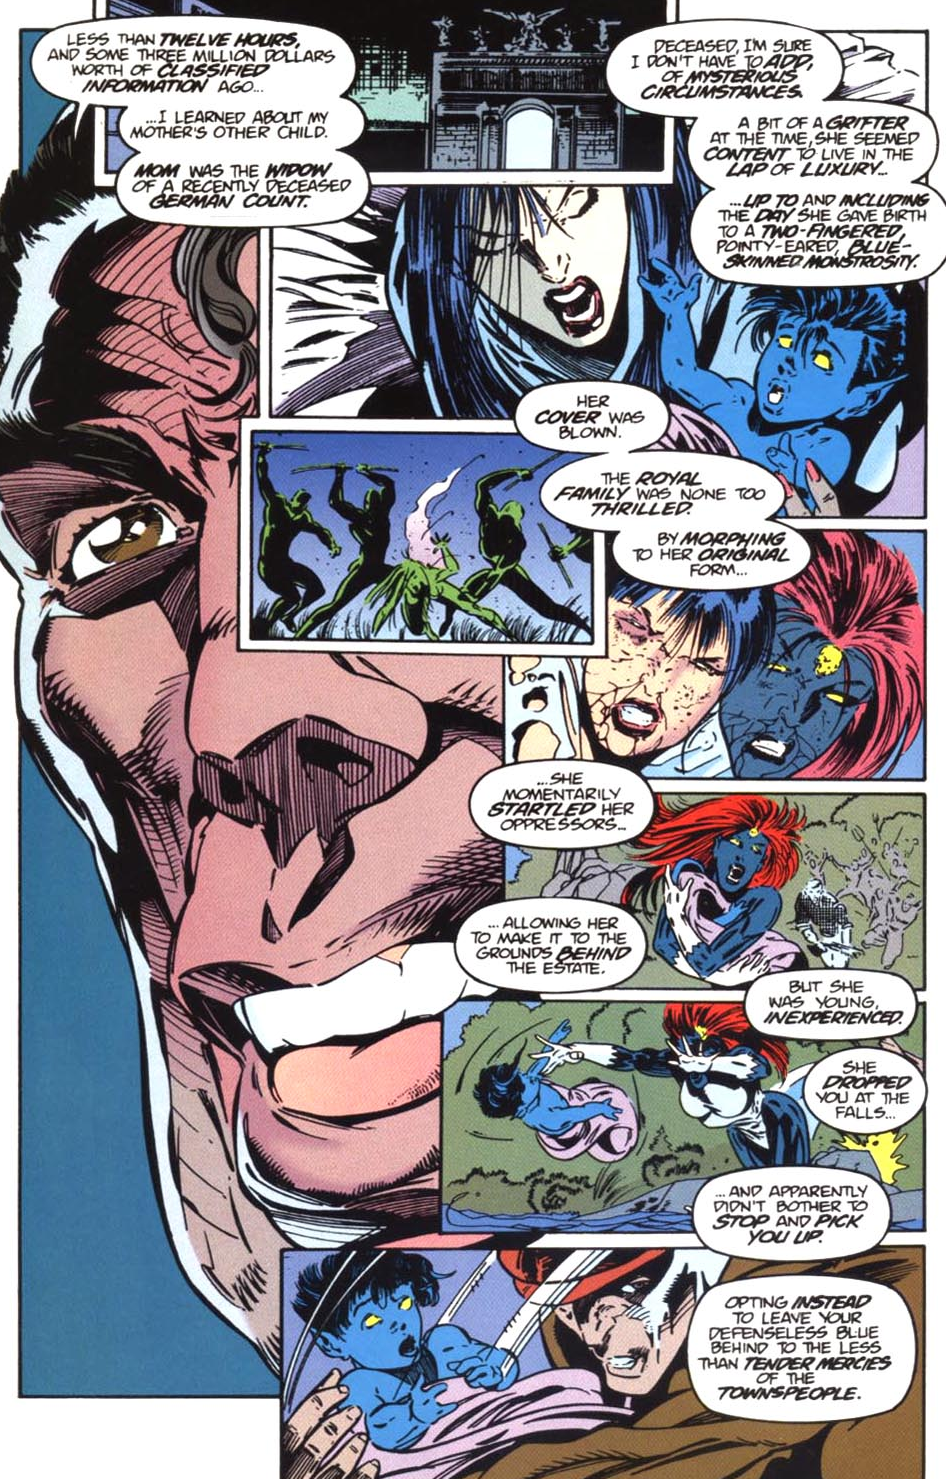 Graydon Creed reveals the truth of his brother Nightcrawler's origin in X-Men Unlimited Vol. 1 #4 "Theories of Relativity" (1994), Marvel Comics. Words by Scott Lobdell, art by Richard Bennett, Steve Moncuse, Glynis Oliver, and Dave Sharpe.